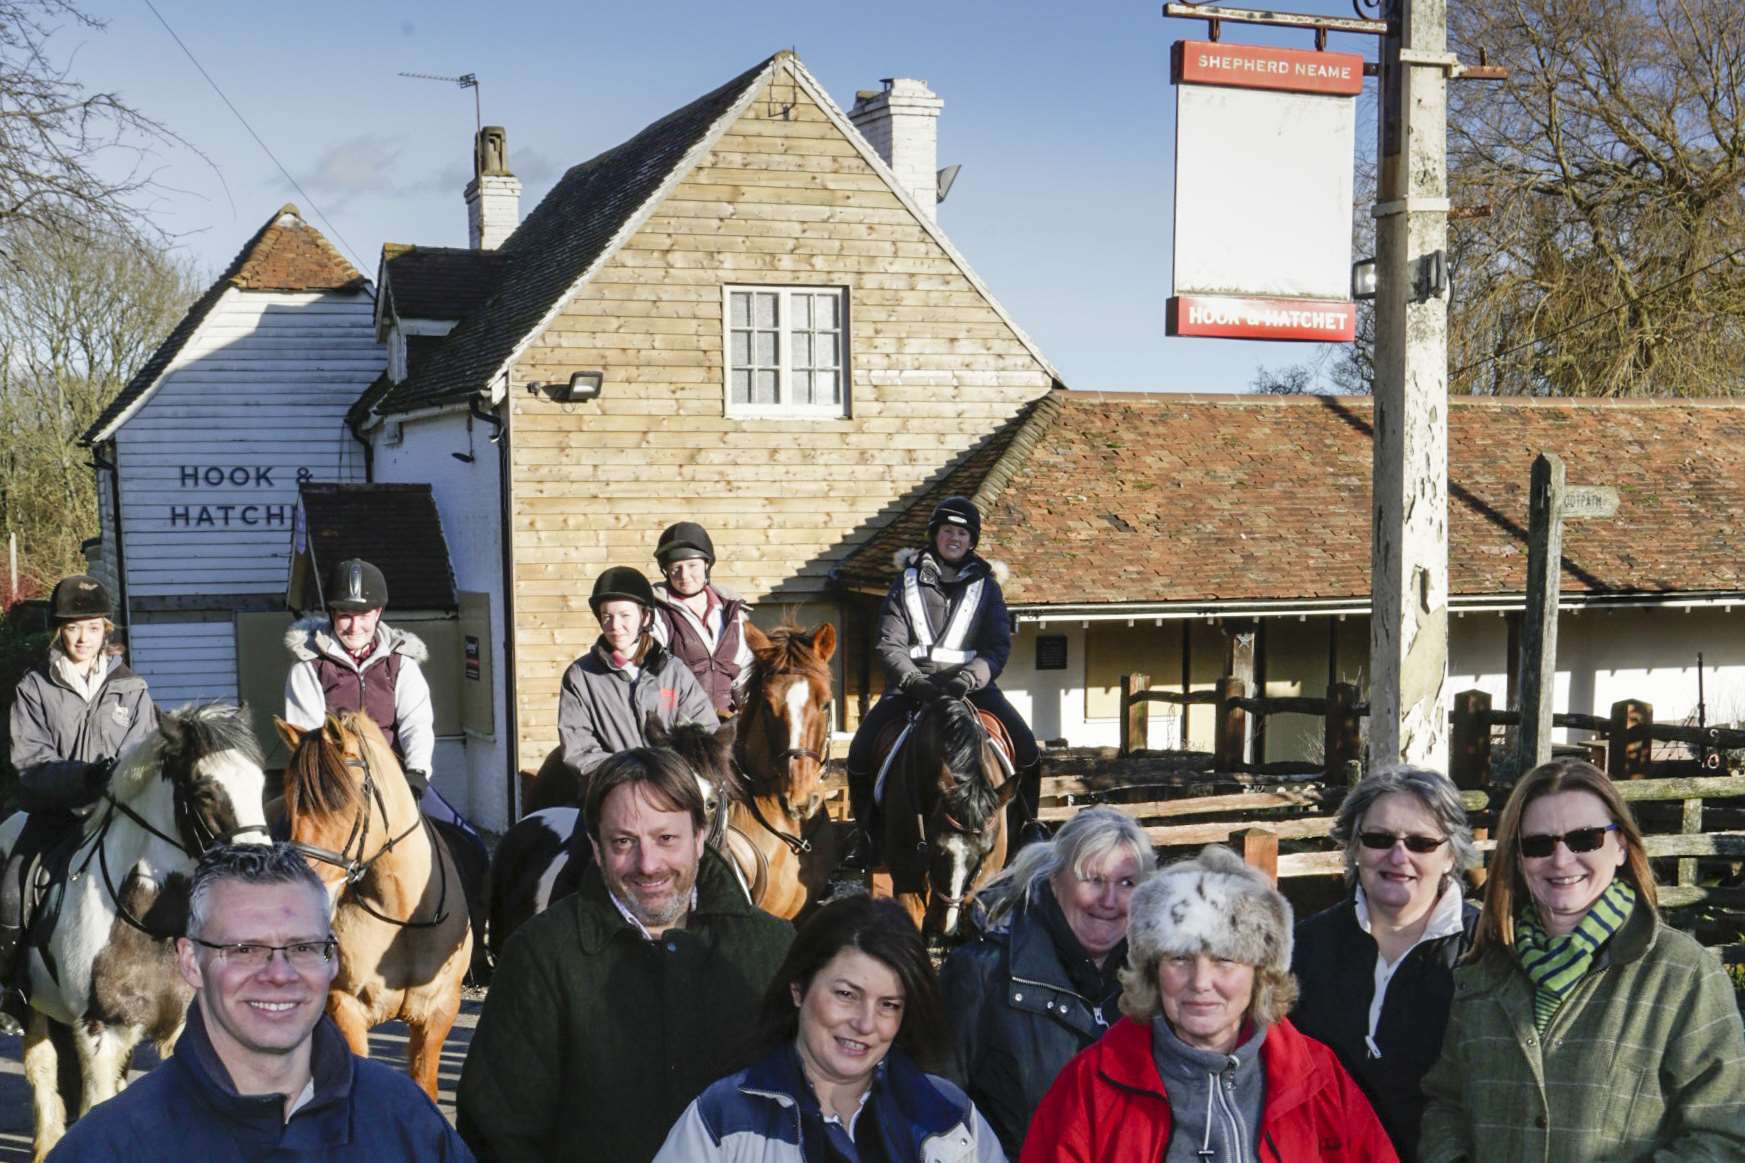 Villagers and business owners pulled together to try to buy the pub